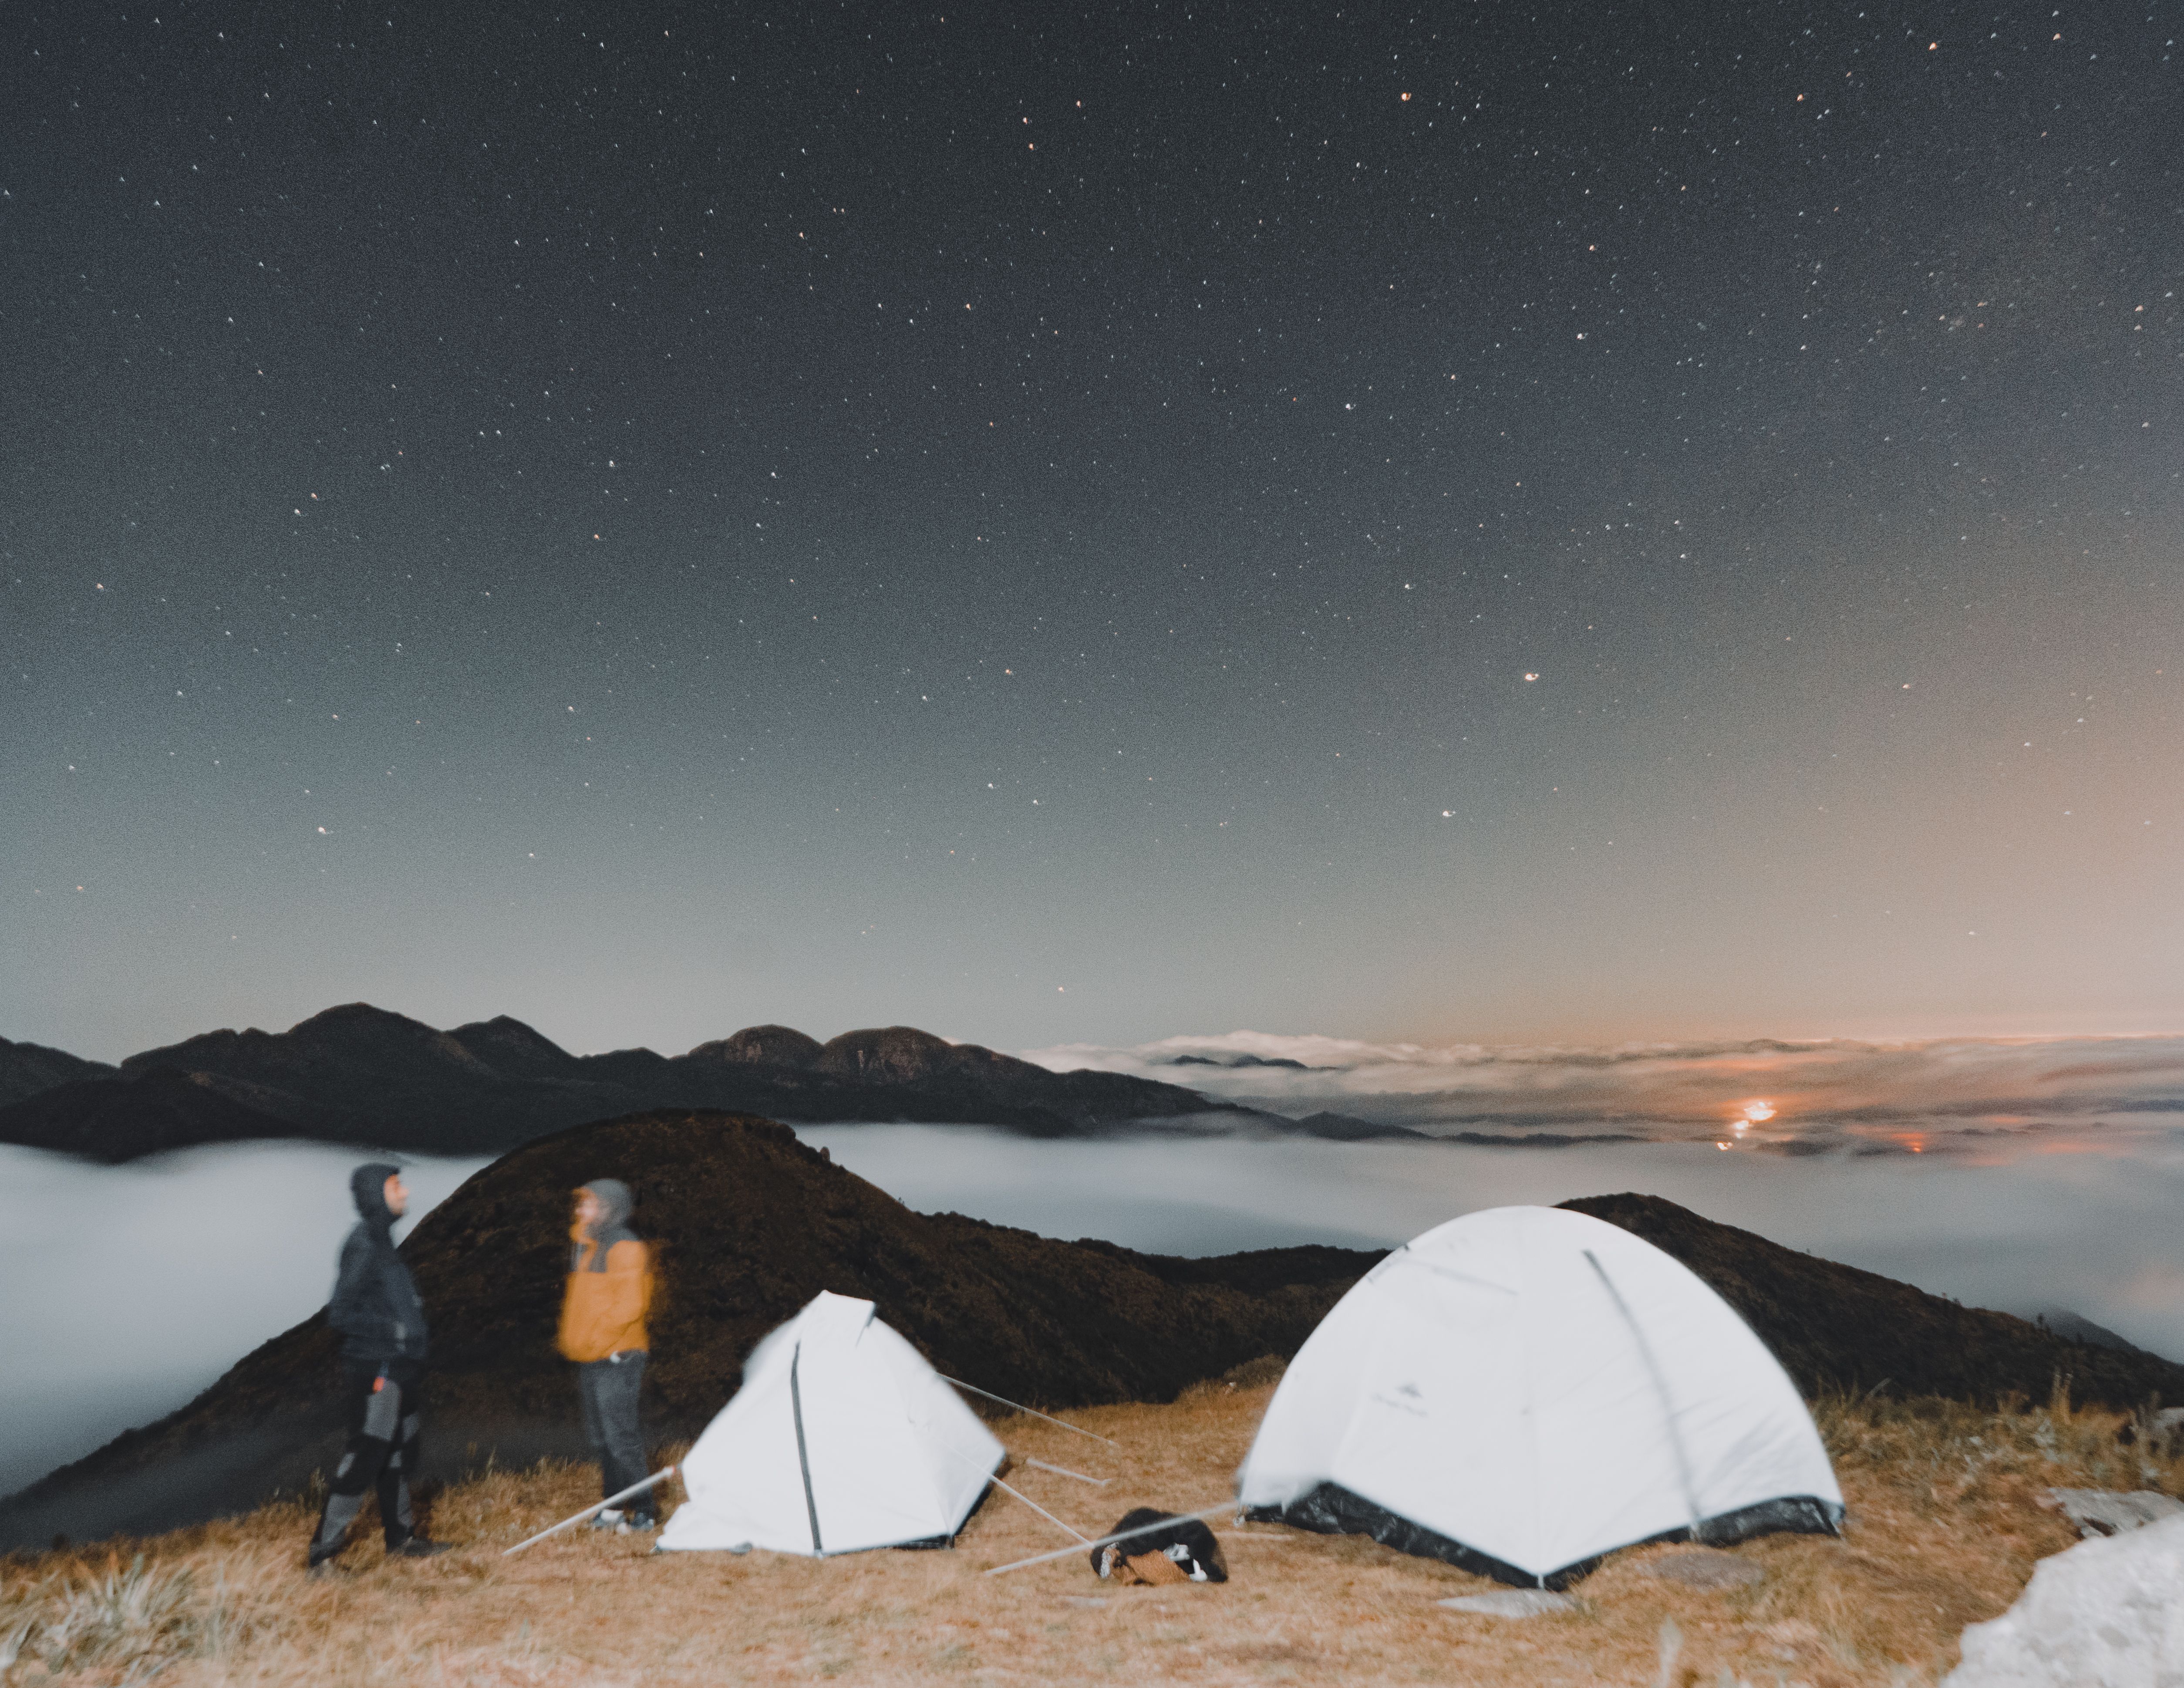 People Camping on a Mountain · Free